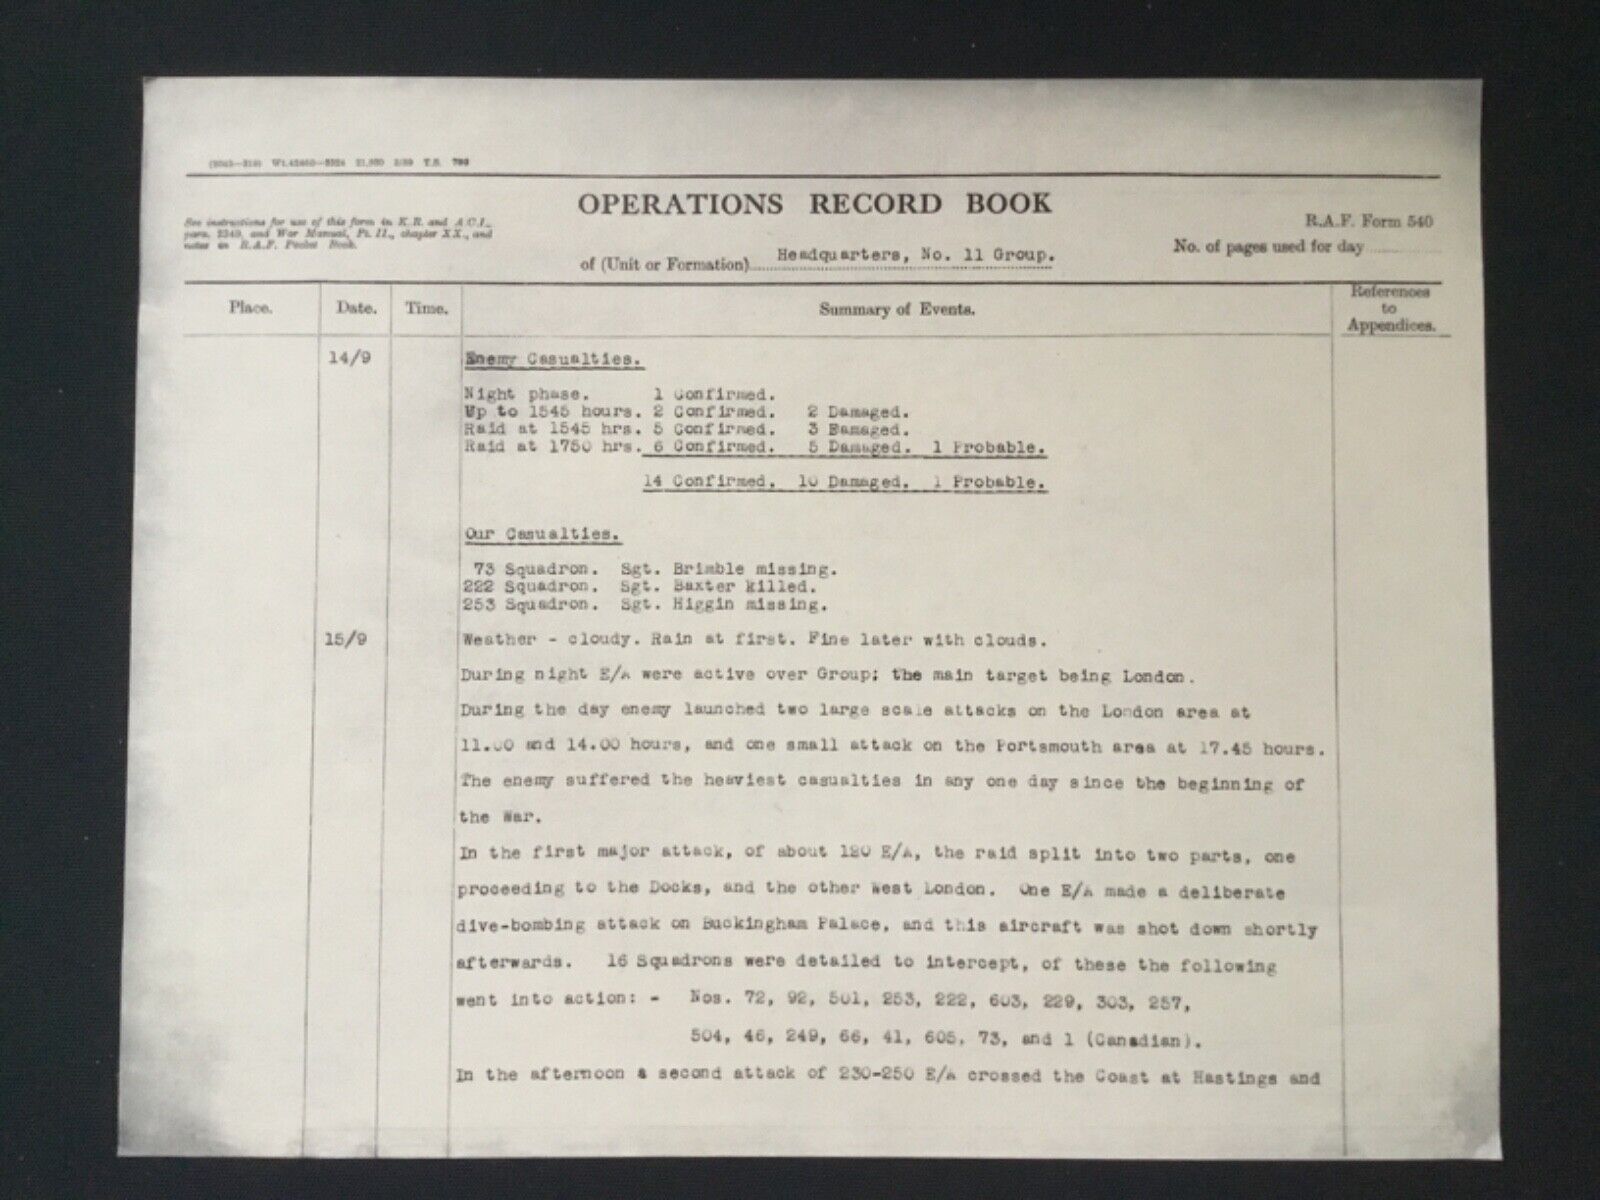 WWII 1940 15TH SEPT BATTLE OF BRITAIN DAY OPERATIONS RECORD BOOK SHEET *(Repro)*